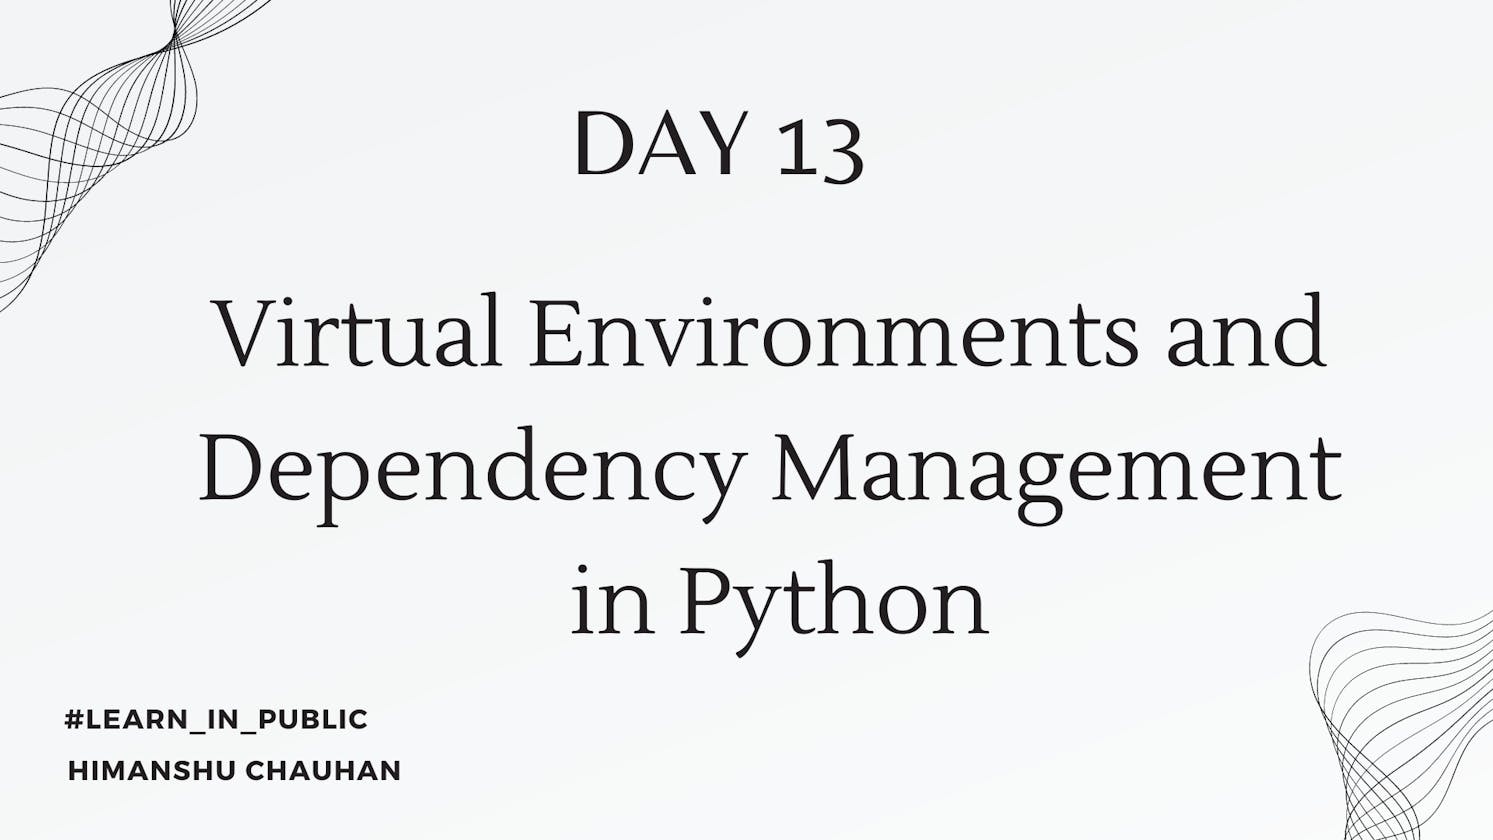 Day 13: Virtual Environments and Dependency Management in Python